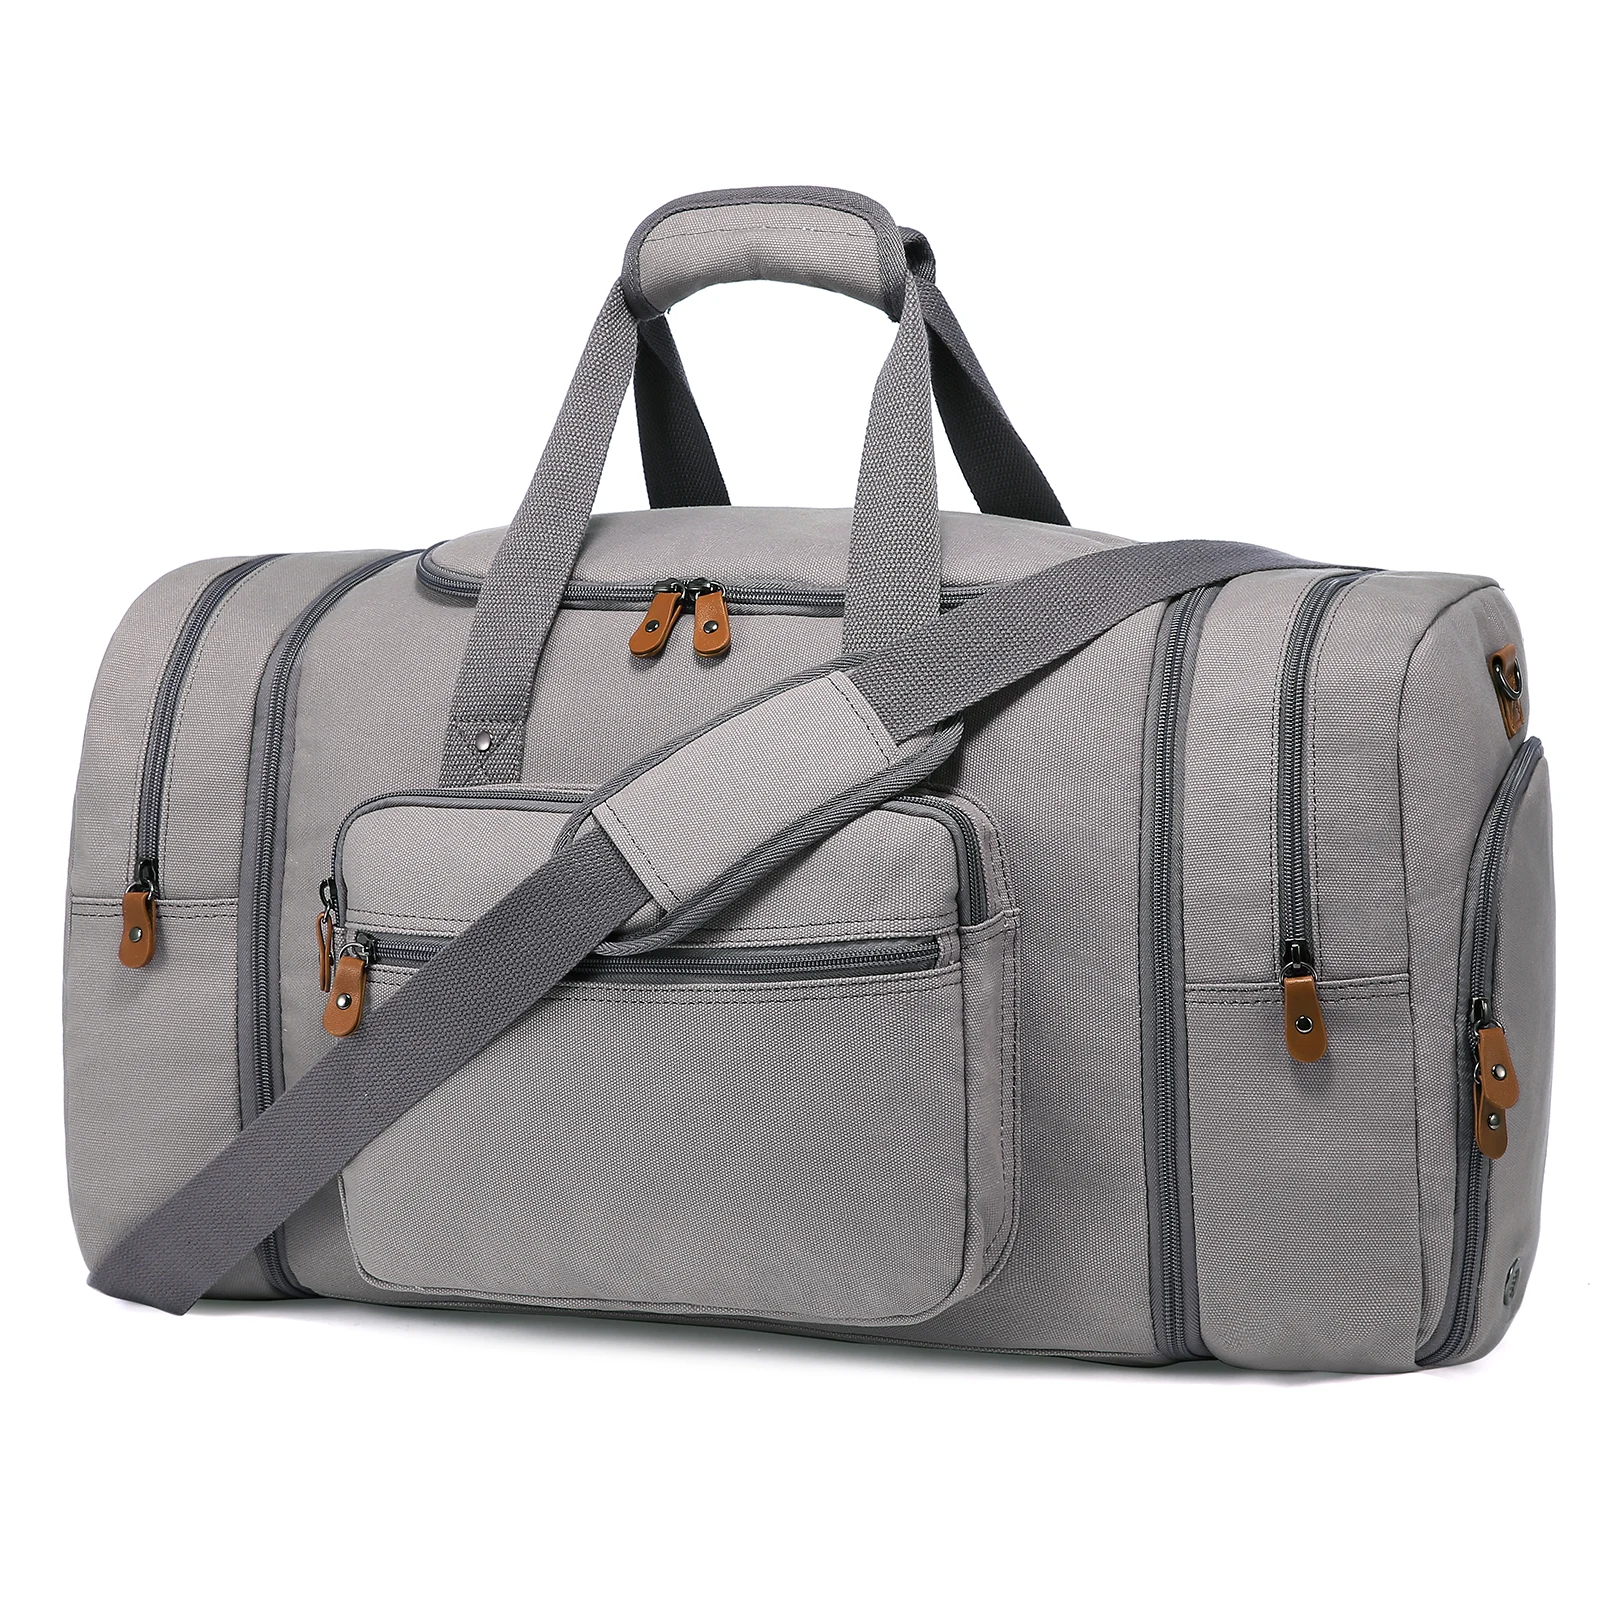 

2021 Men Women Large Capacity Weekend Short Travel Bag Stripe Canvas Luggage Sport Gym Travel Duffel Bag With Shoe Compartment